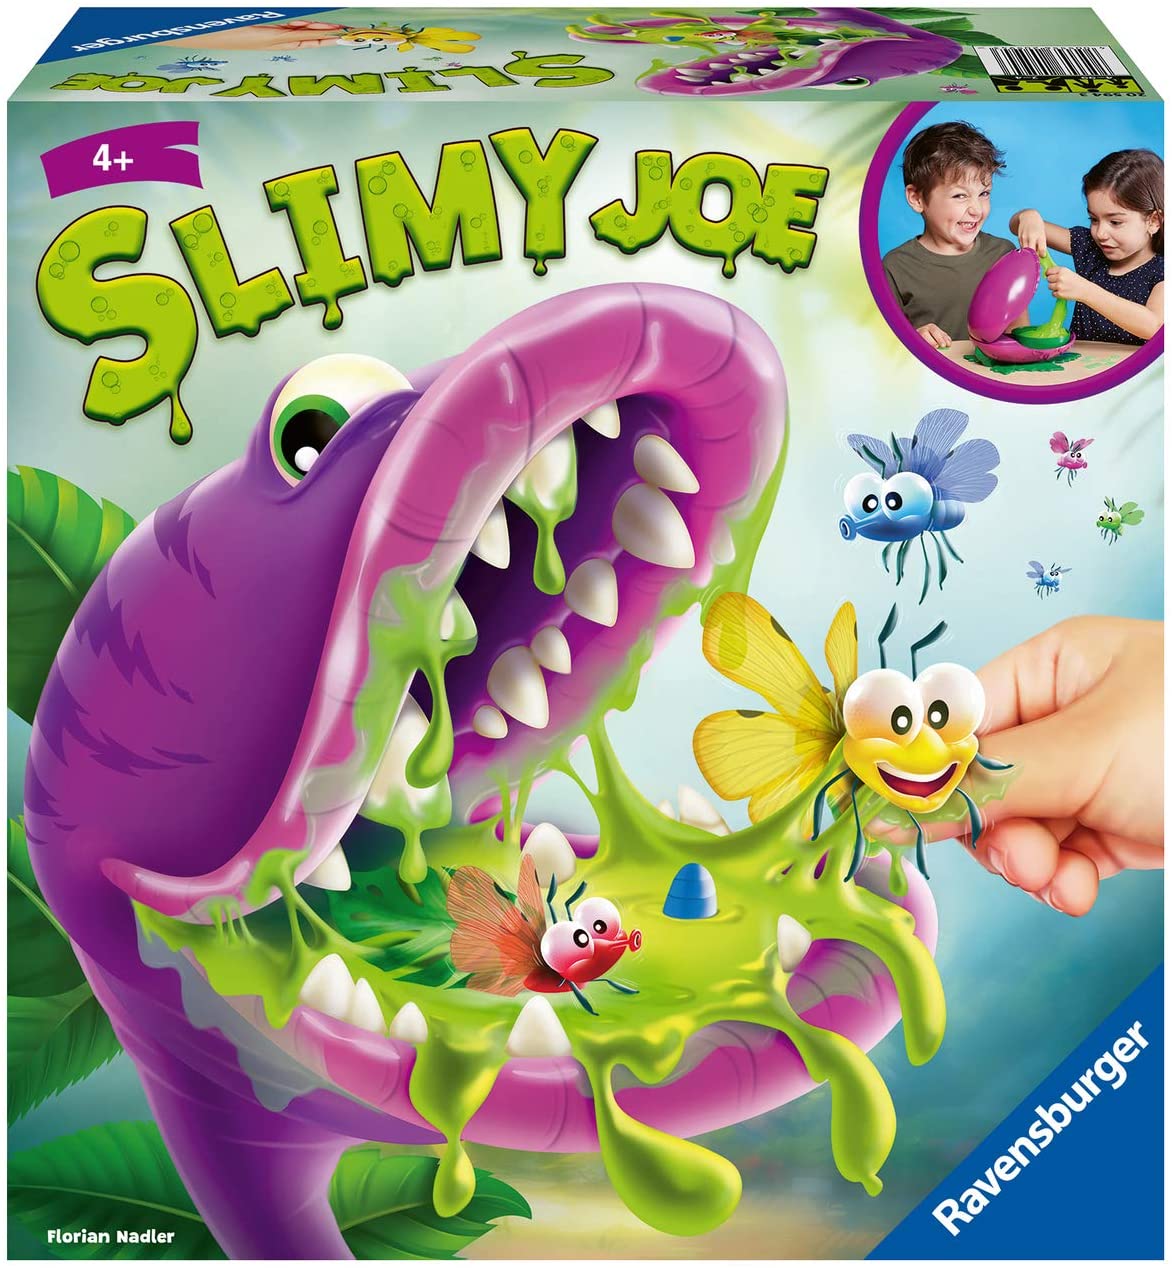 Ravensburger Kindere 20594 Slimy Joe-A Slimy Collectable And Action Game Fo